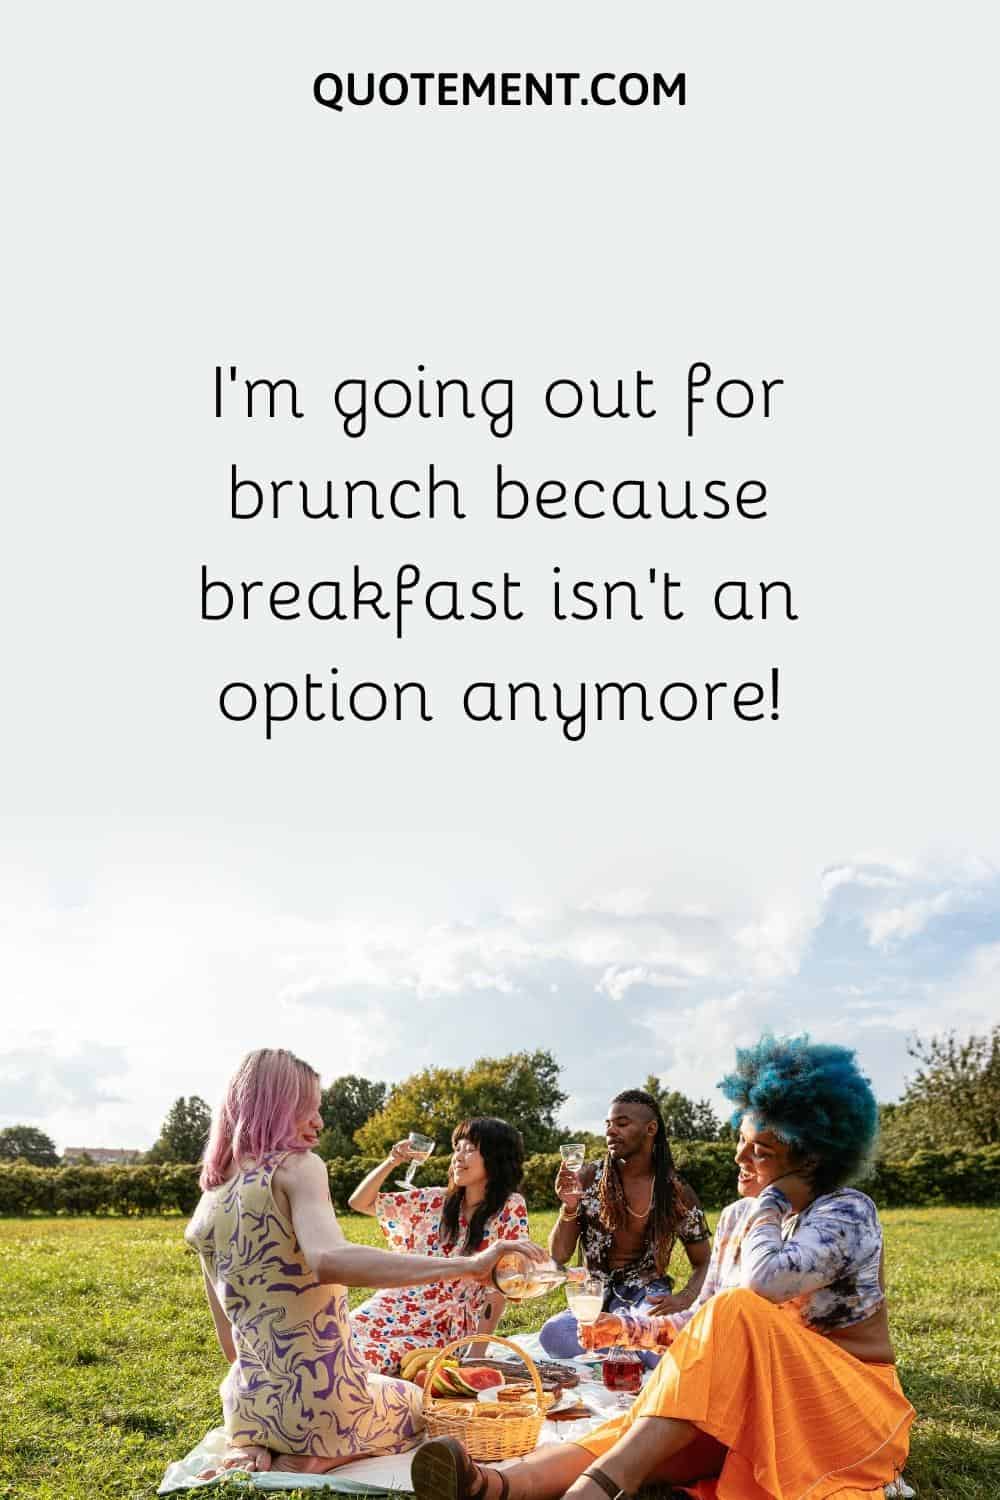 I'm going out for brunch because breakfast isn't an option anymore!